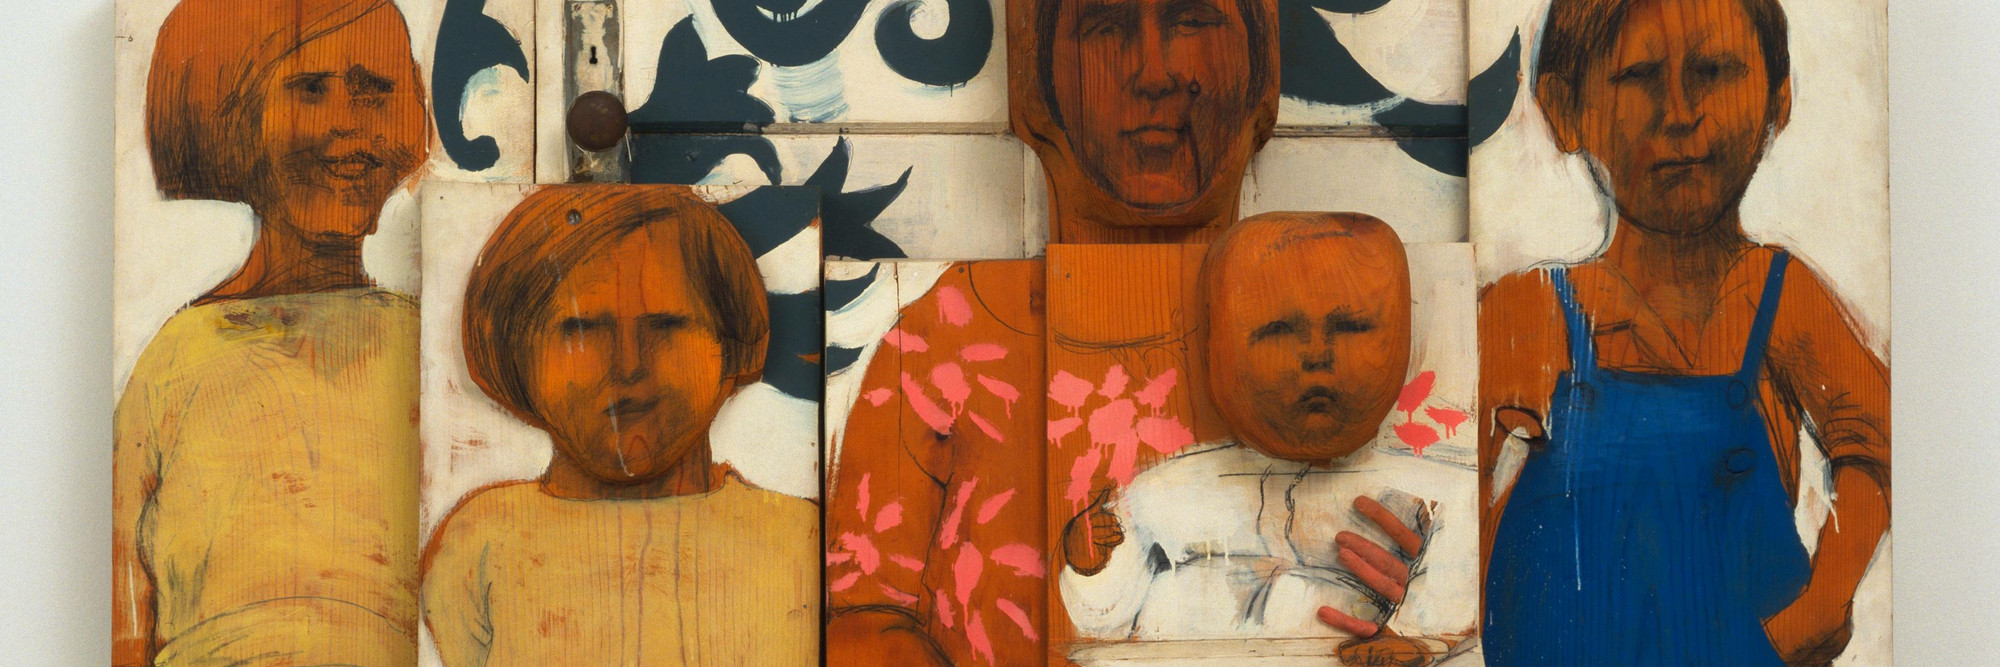 Marisol (Marisol Escobar). The Family. 1962. Paint and graphite on wood, sneakers, tinted plaster, door knob and plate, three sections, Overall 6&#39; 10 5/8&#34; x 65 1/2&#34; x 15 1/2&#34; (209.8 x 166.3 x 39.3 cm). Advisory Committee Fund. © 2020 Marisol